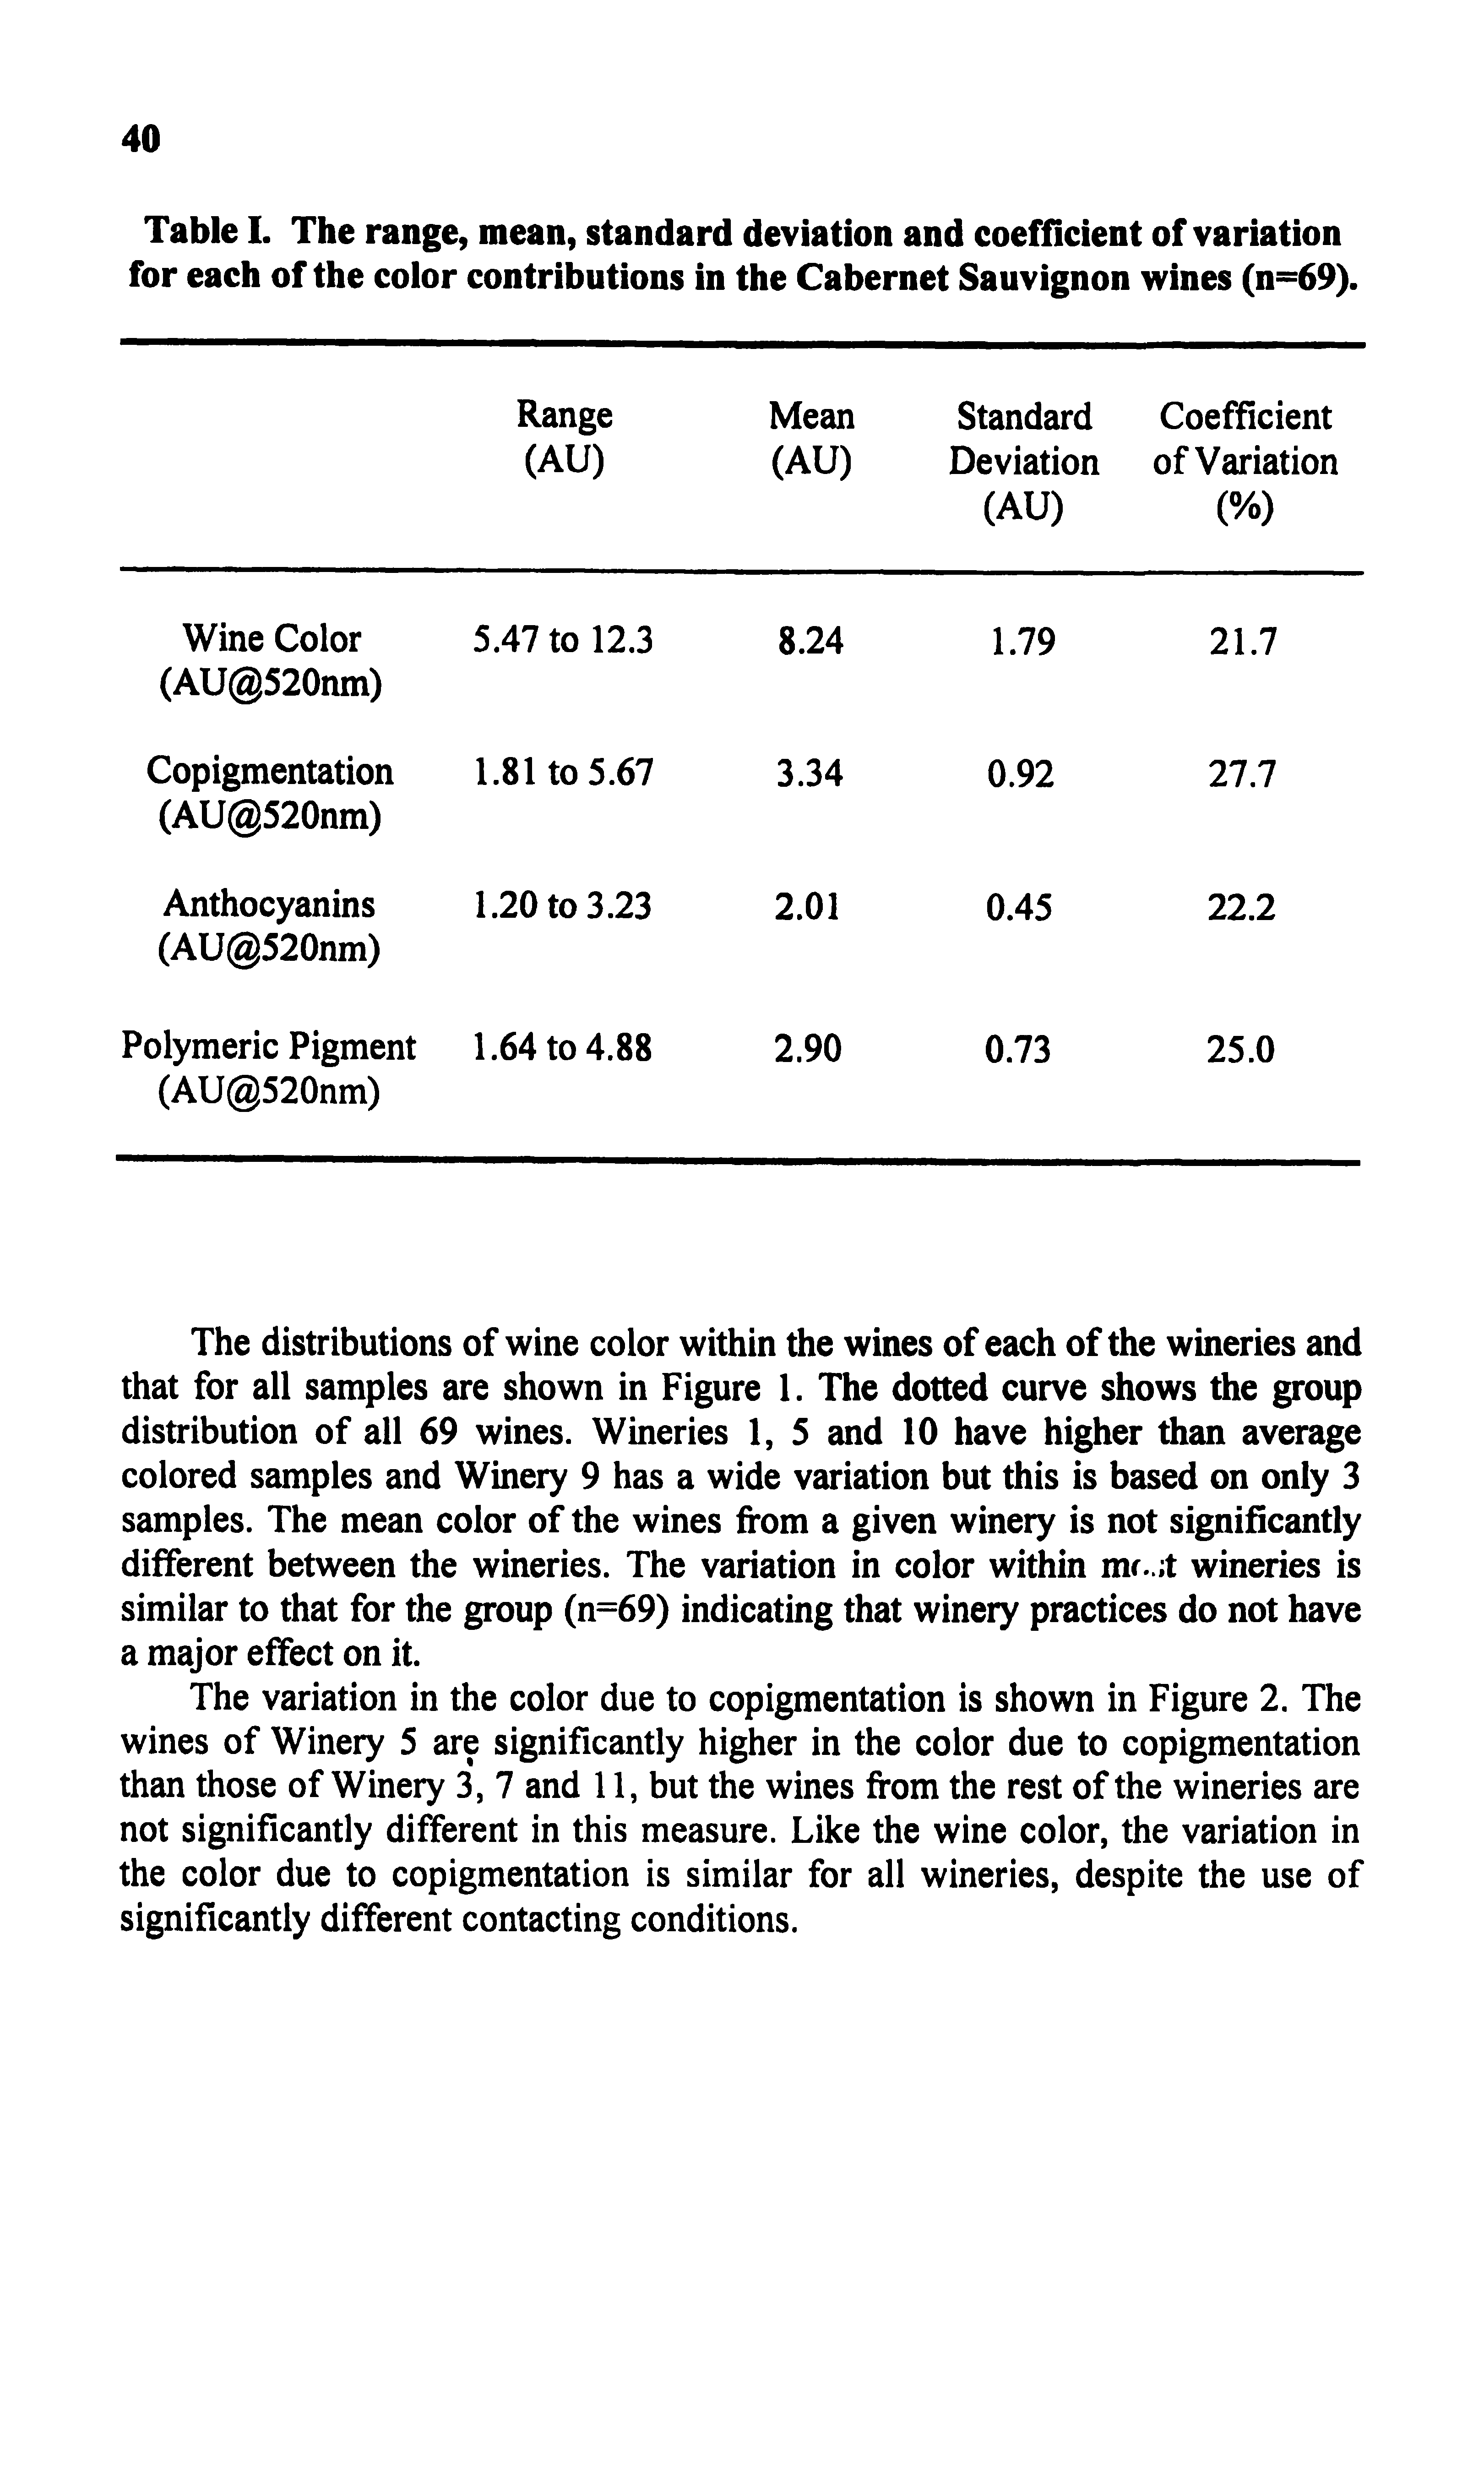 Table I. The range, mean, standard deviation and coefficient of variation for each of the coior contributions in the Cabernet Sauvignon wines (n=69).